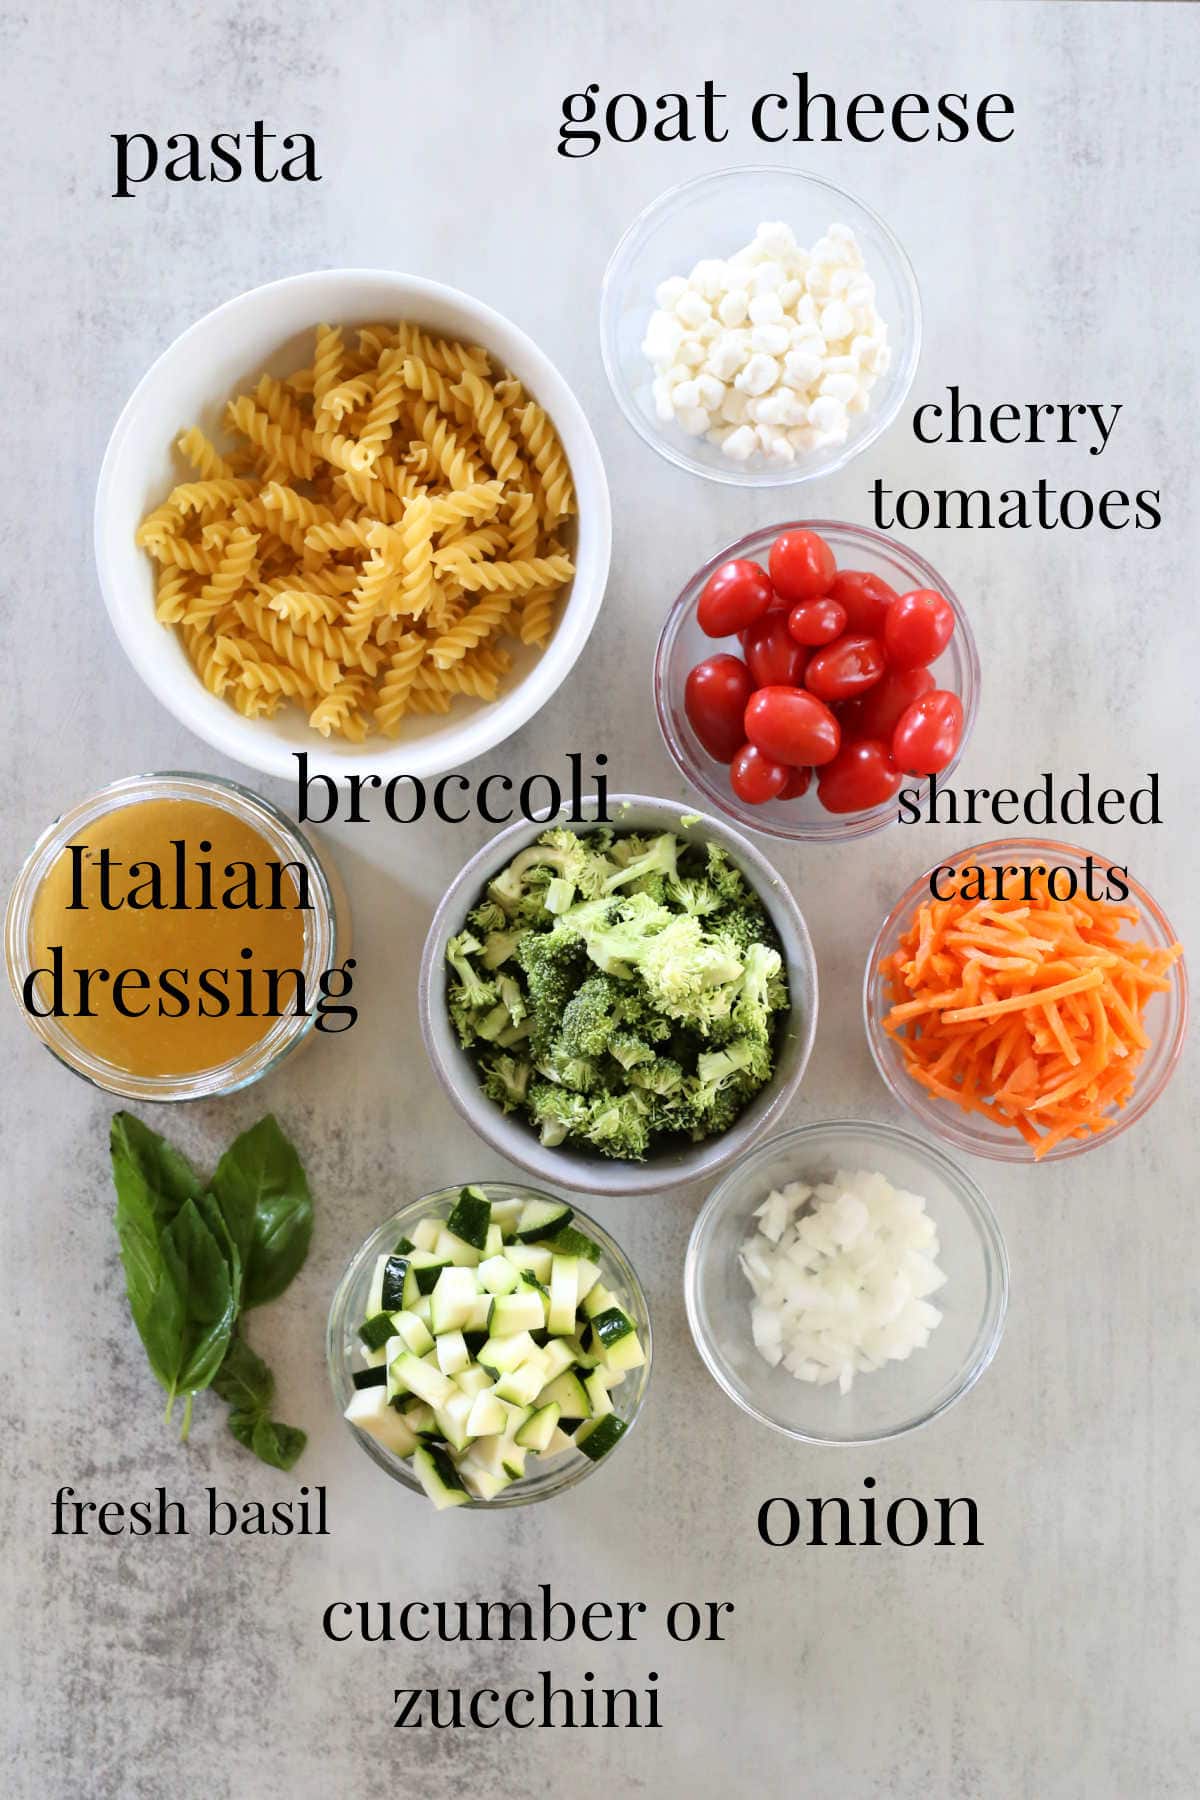 Ingredients for pasta salad recipe with Italian salad dressing.